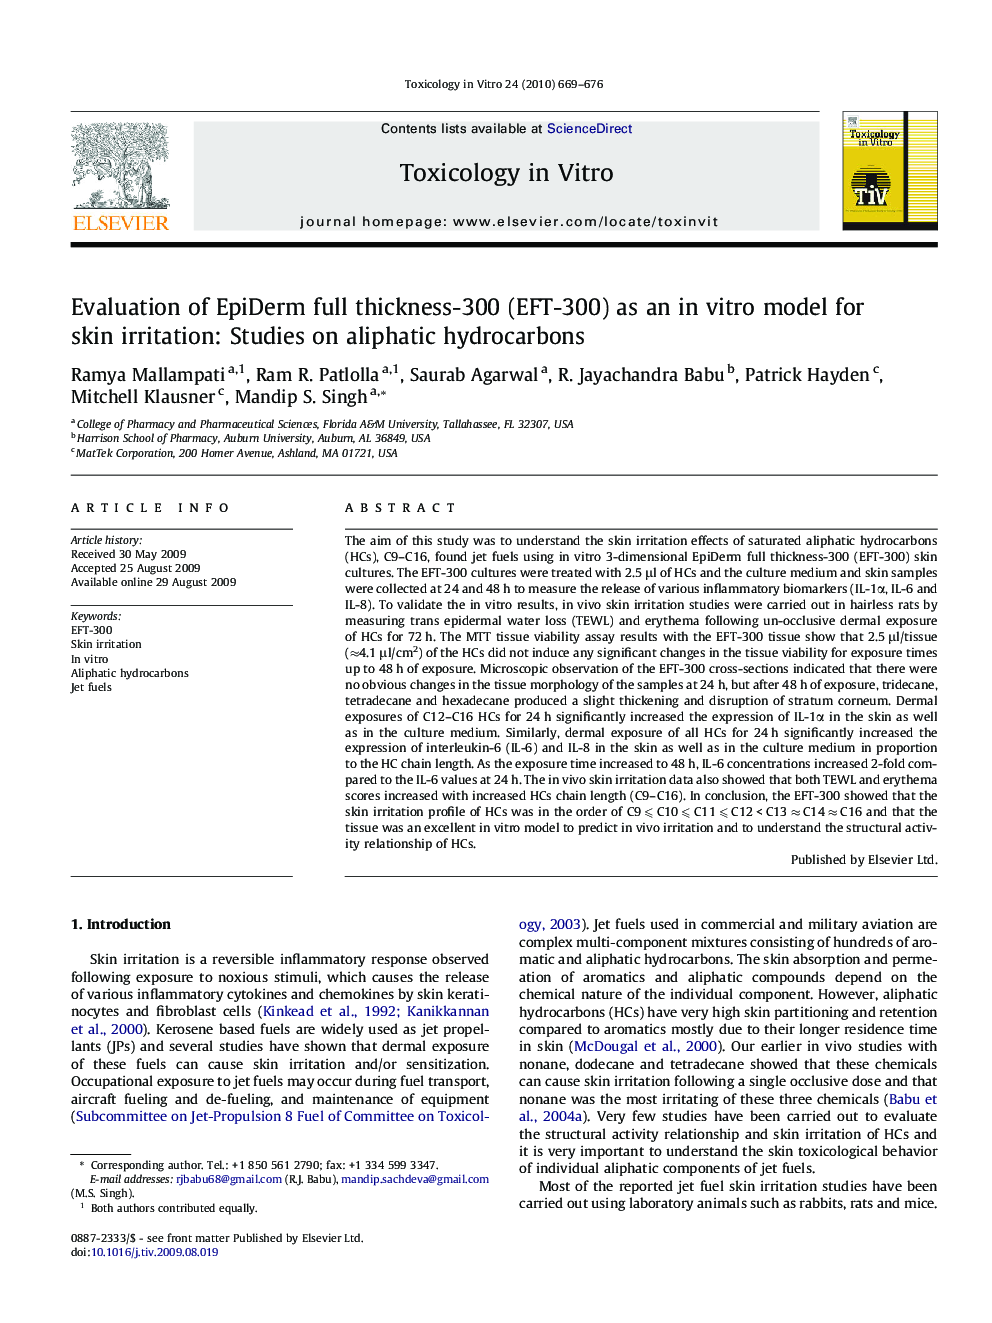 Evaluation of EpiDerm full thickness-300 (EFT-300) as an in vitro model for skin irritation: Studies on aliphatic hydrocarbons